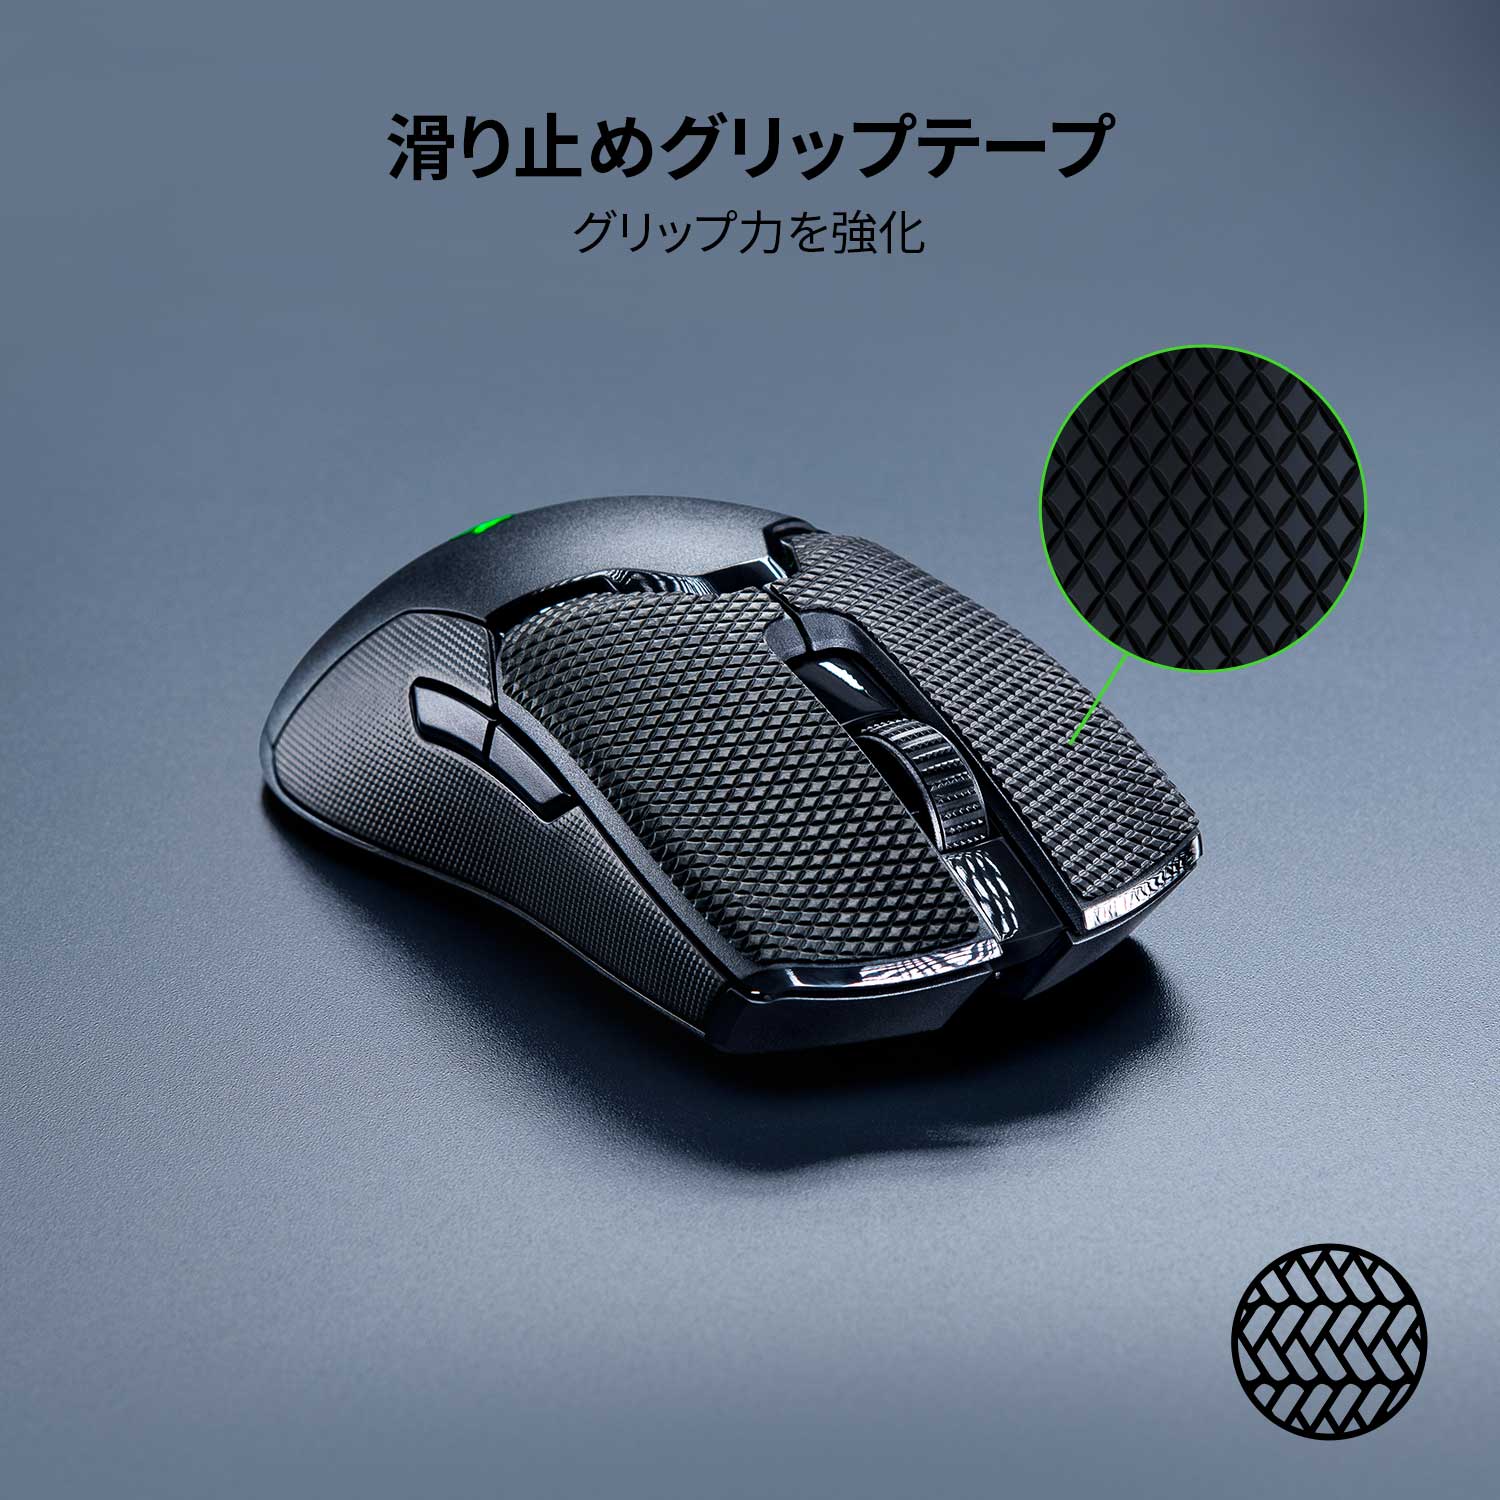 Razer Mouse Grip Tape ( Viper Ultimate/Viper)  マウスグリップテープ （ ヴァイパー アルティメット / ヴァイパー） thumbnail 2